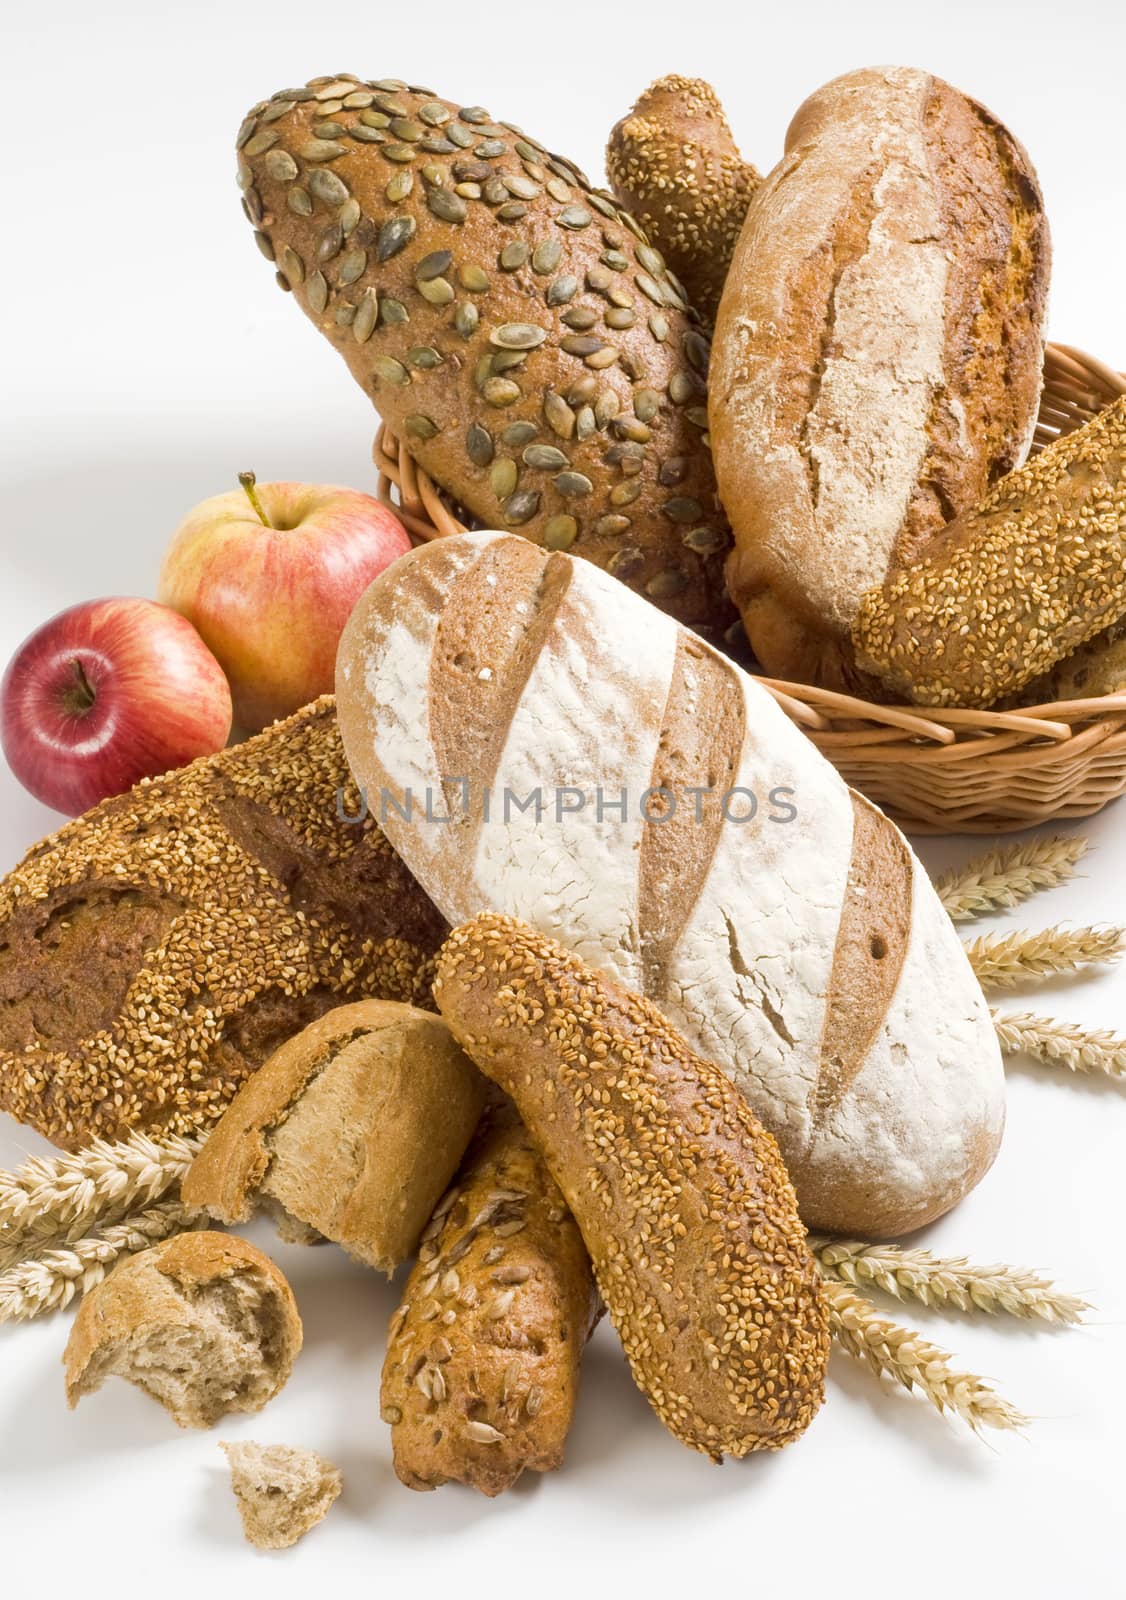 Variety of brown bread by Digifoodstock